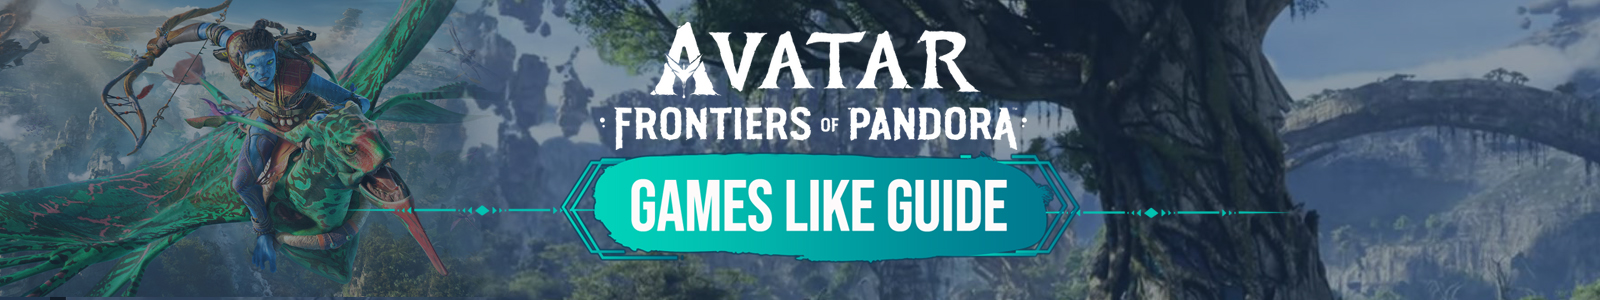 Avatar Frontiers of Pandora games like guide